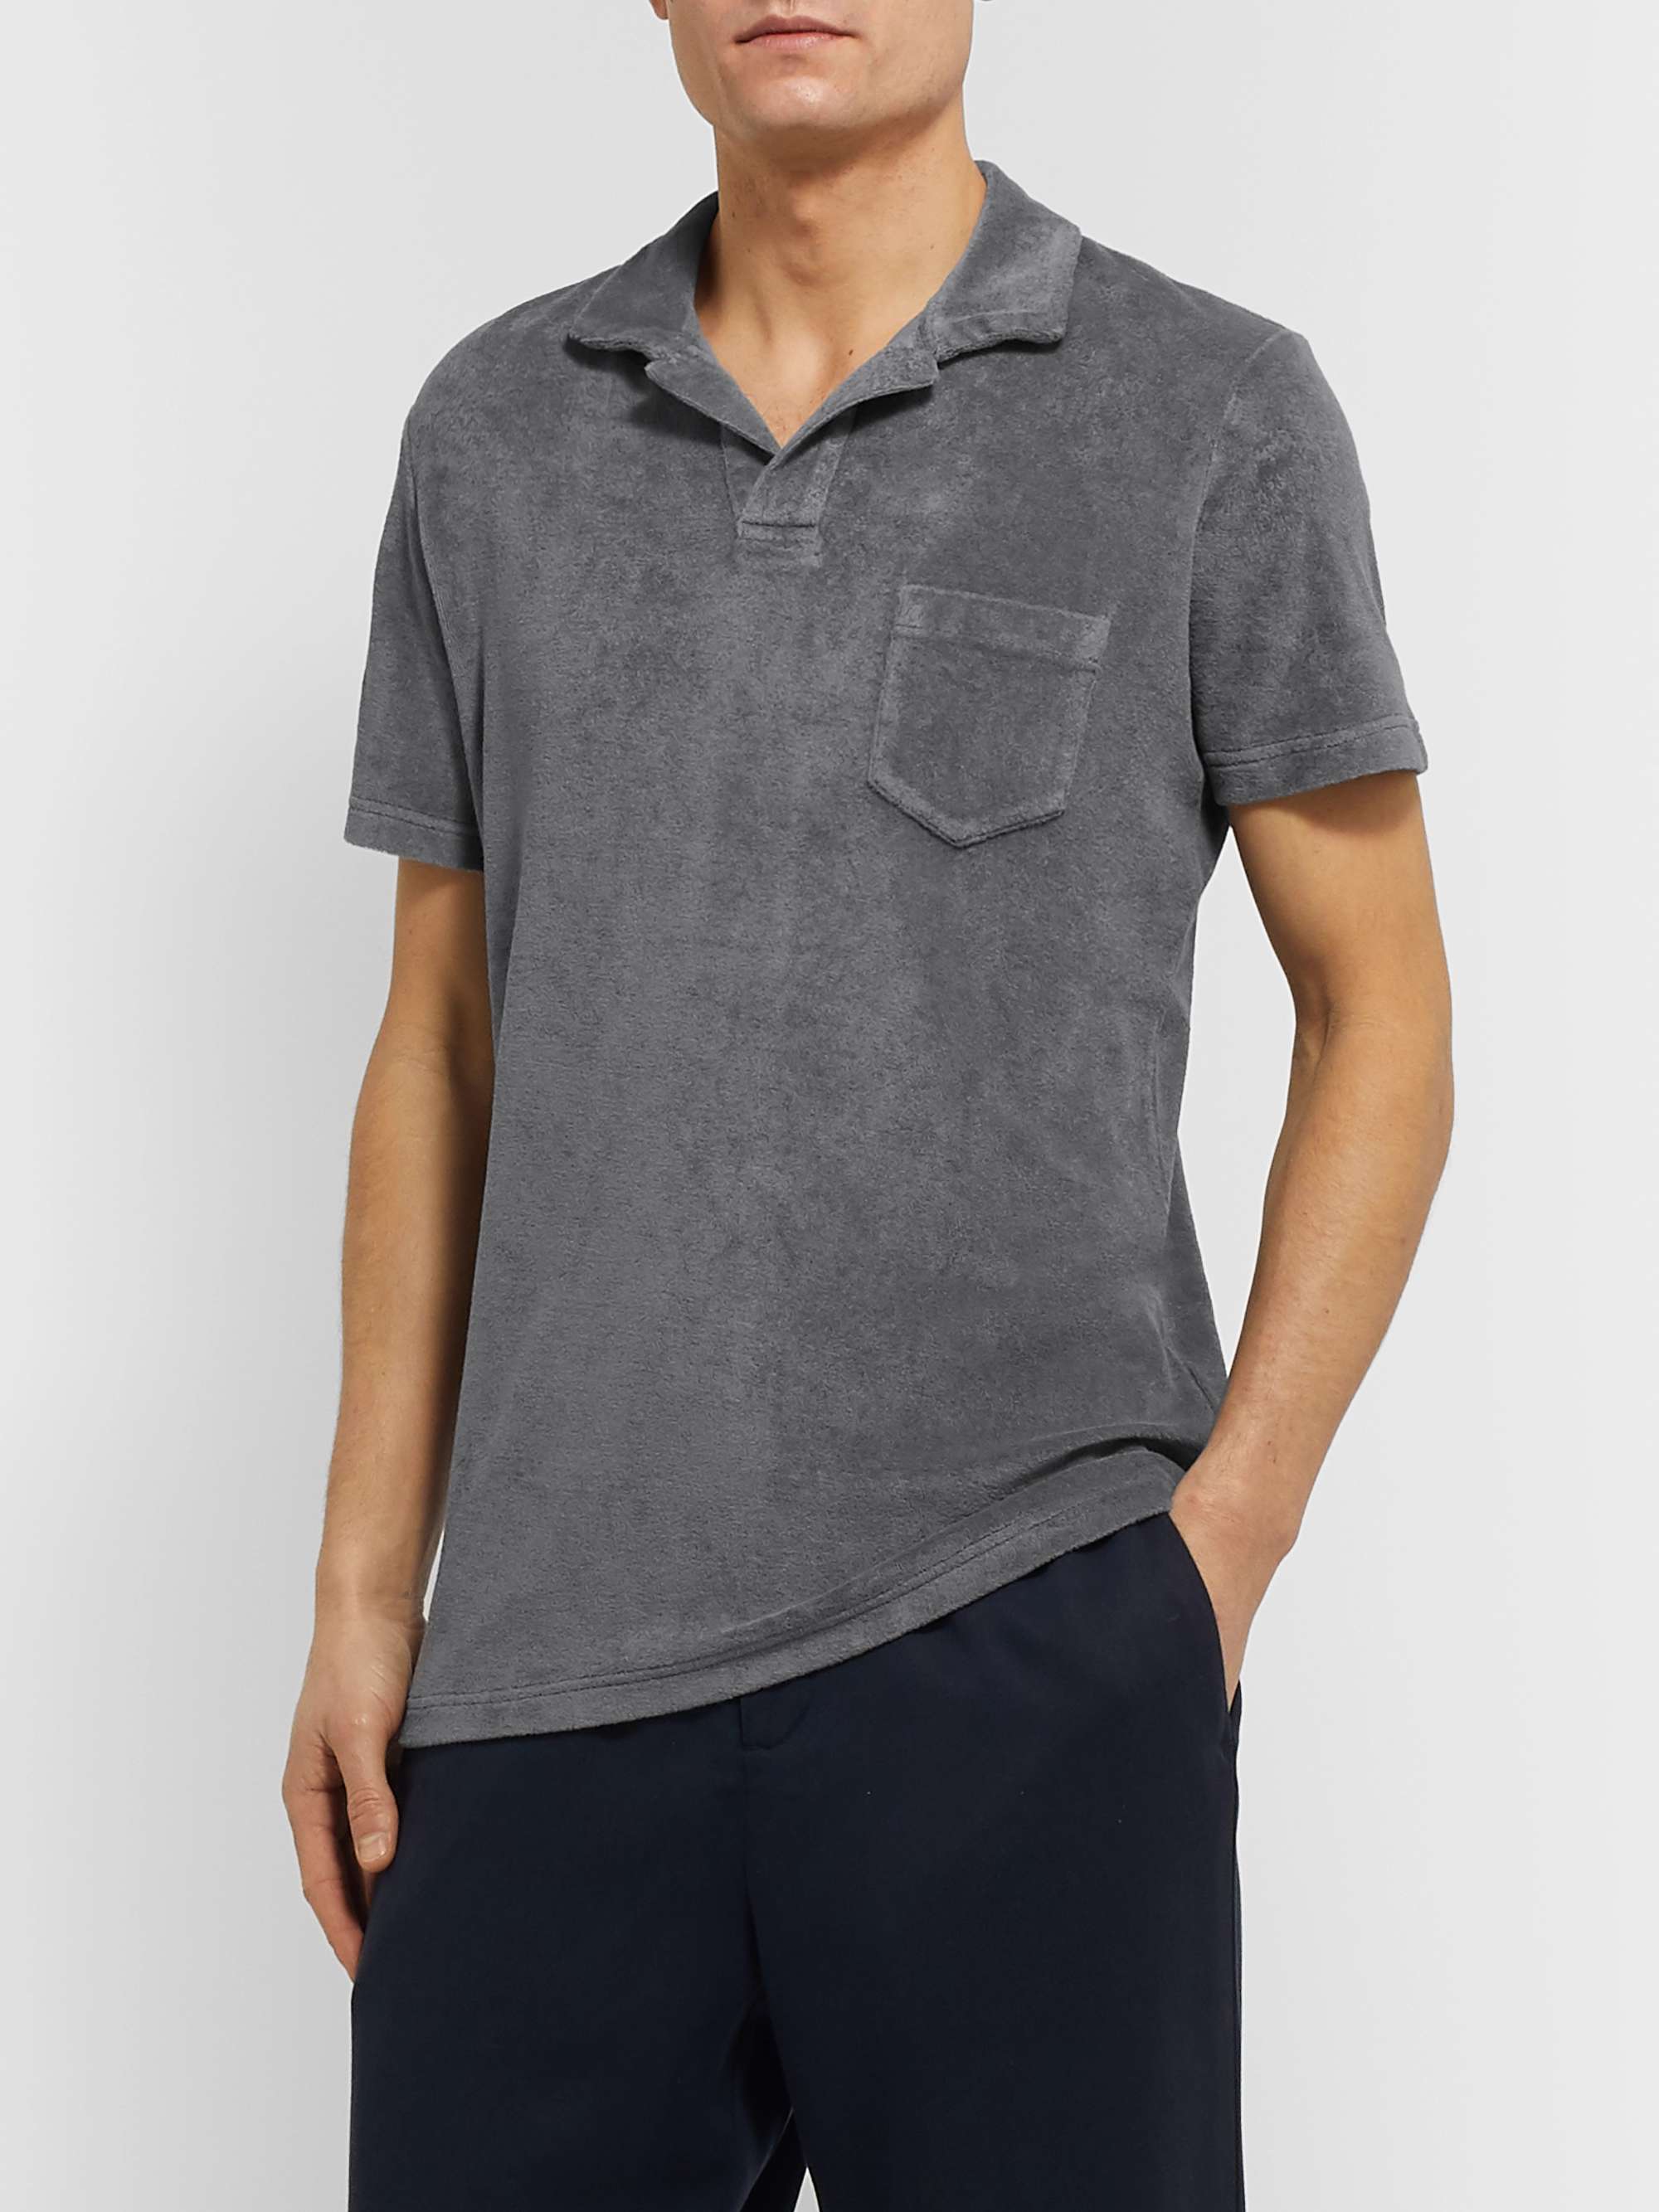 ORLEBAR BROWN Slim-Fit Camp-Collar Cotton-Terry Polo Shirt | MR PORTER